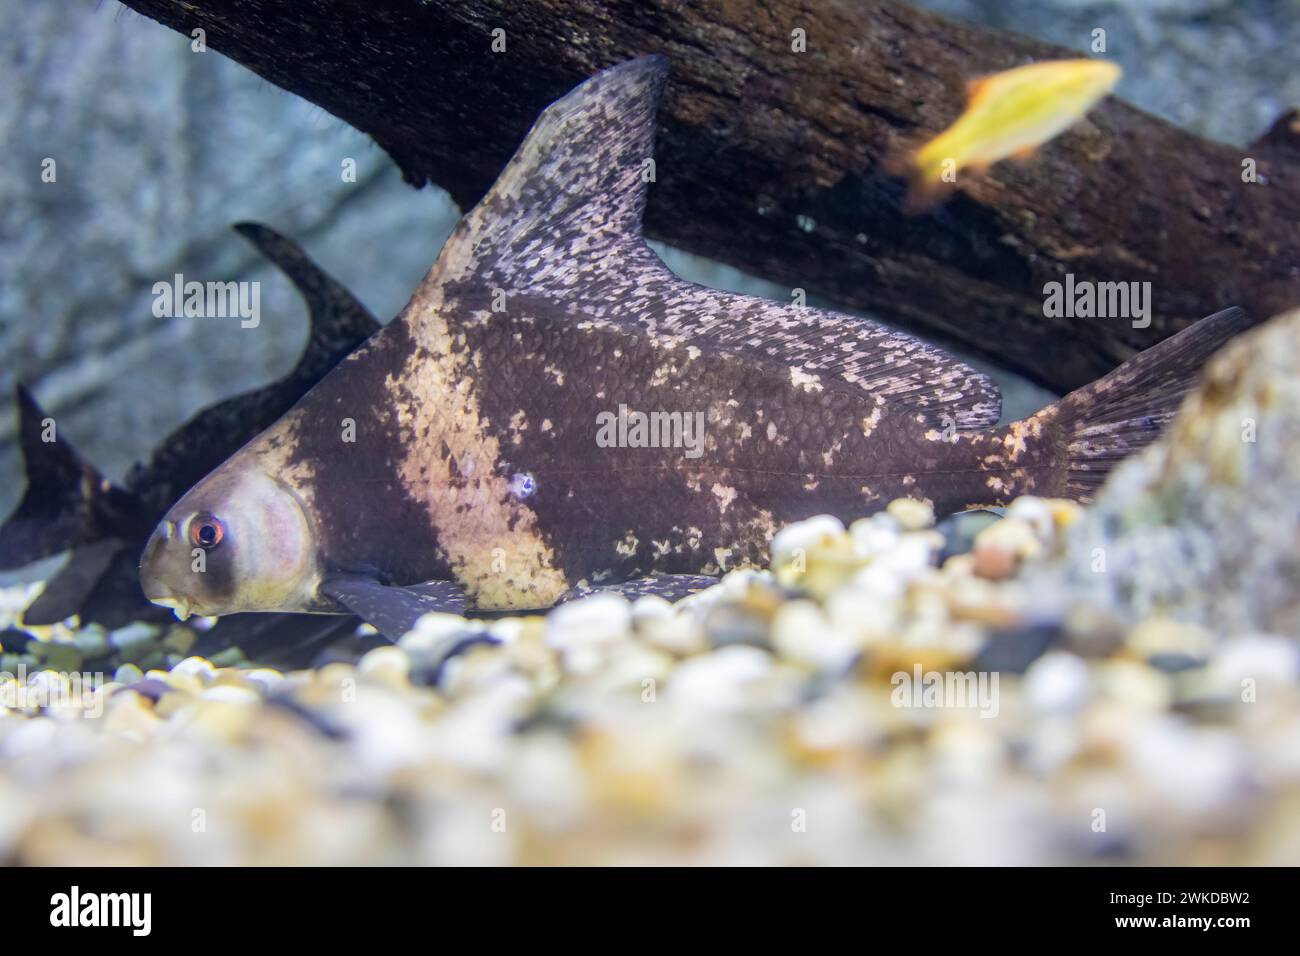 The Chinese high-fin banded shark (Myxocyprinus asiaticus) is a popular freshwater aquarium fish.  It has declined drastically due to pollution, dams, Stock Photo